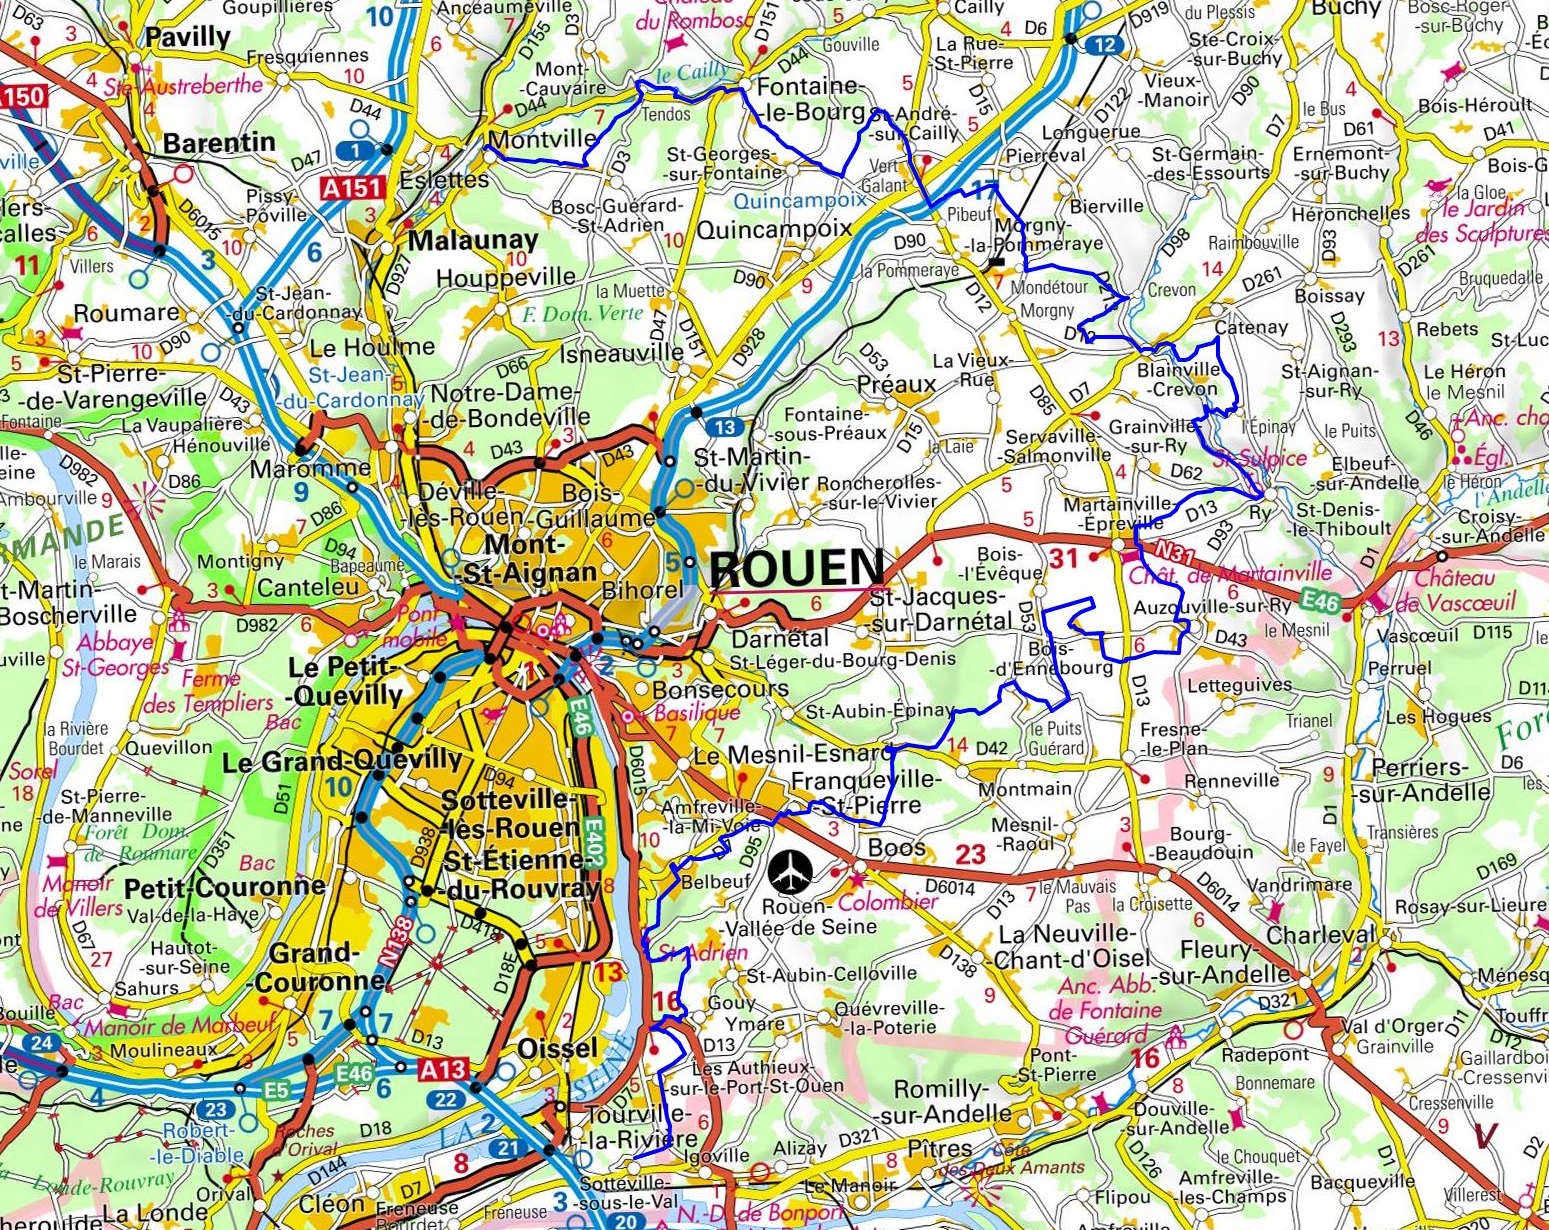 GR25 Walking from Sotteville-sous-le-Val to Montville (Seine-Maritime) 1